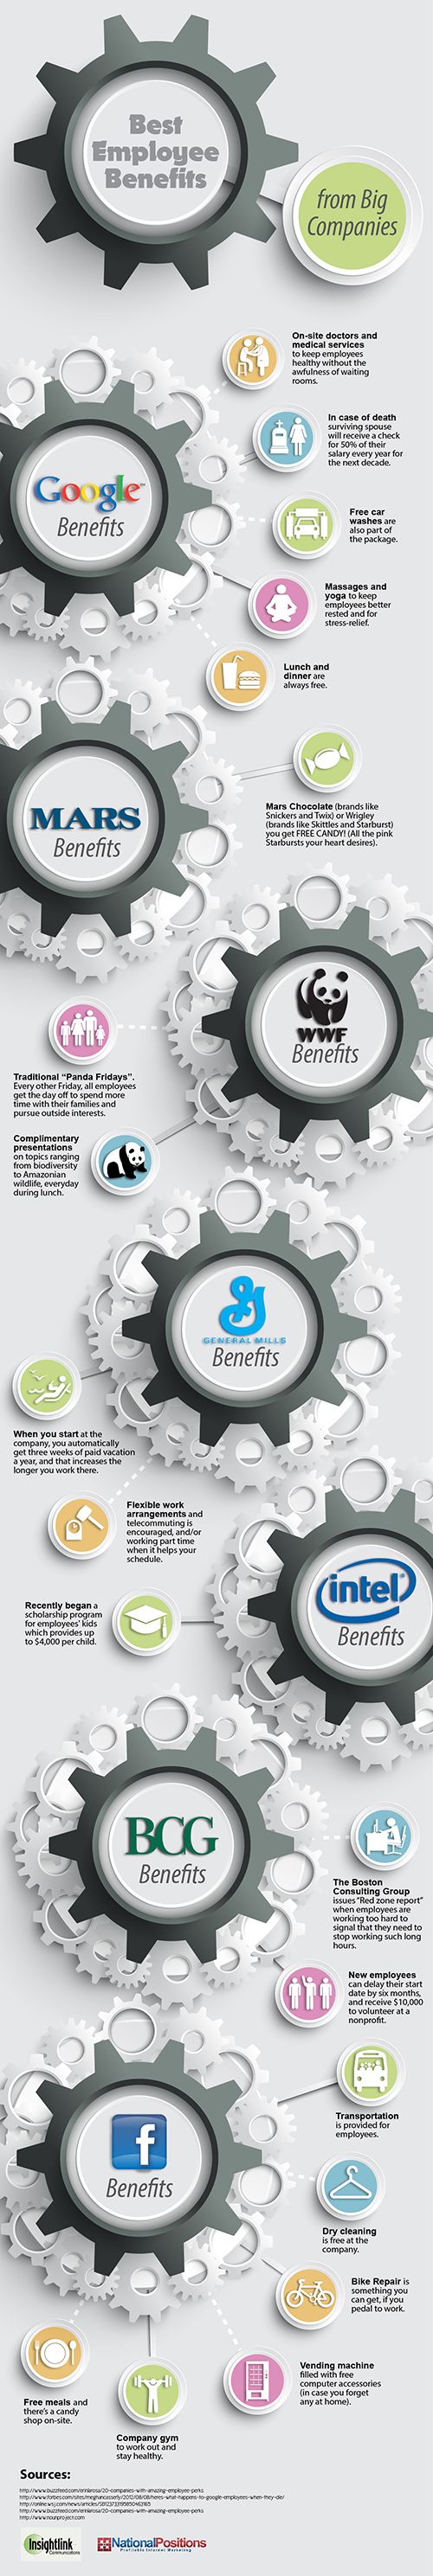 Best Employee Benefits From Big Companies [Infographic]